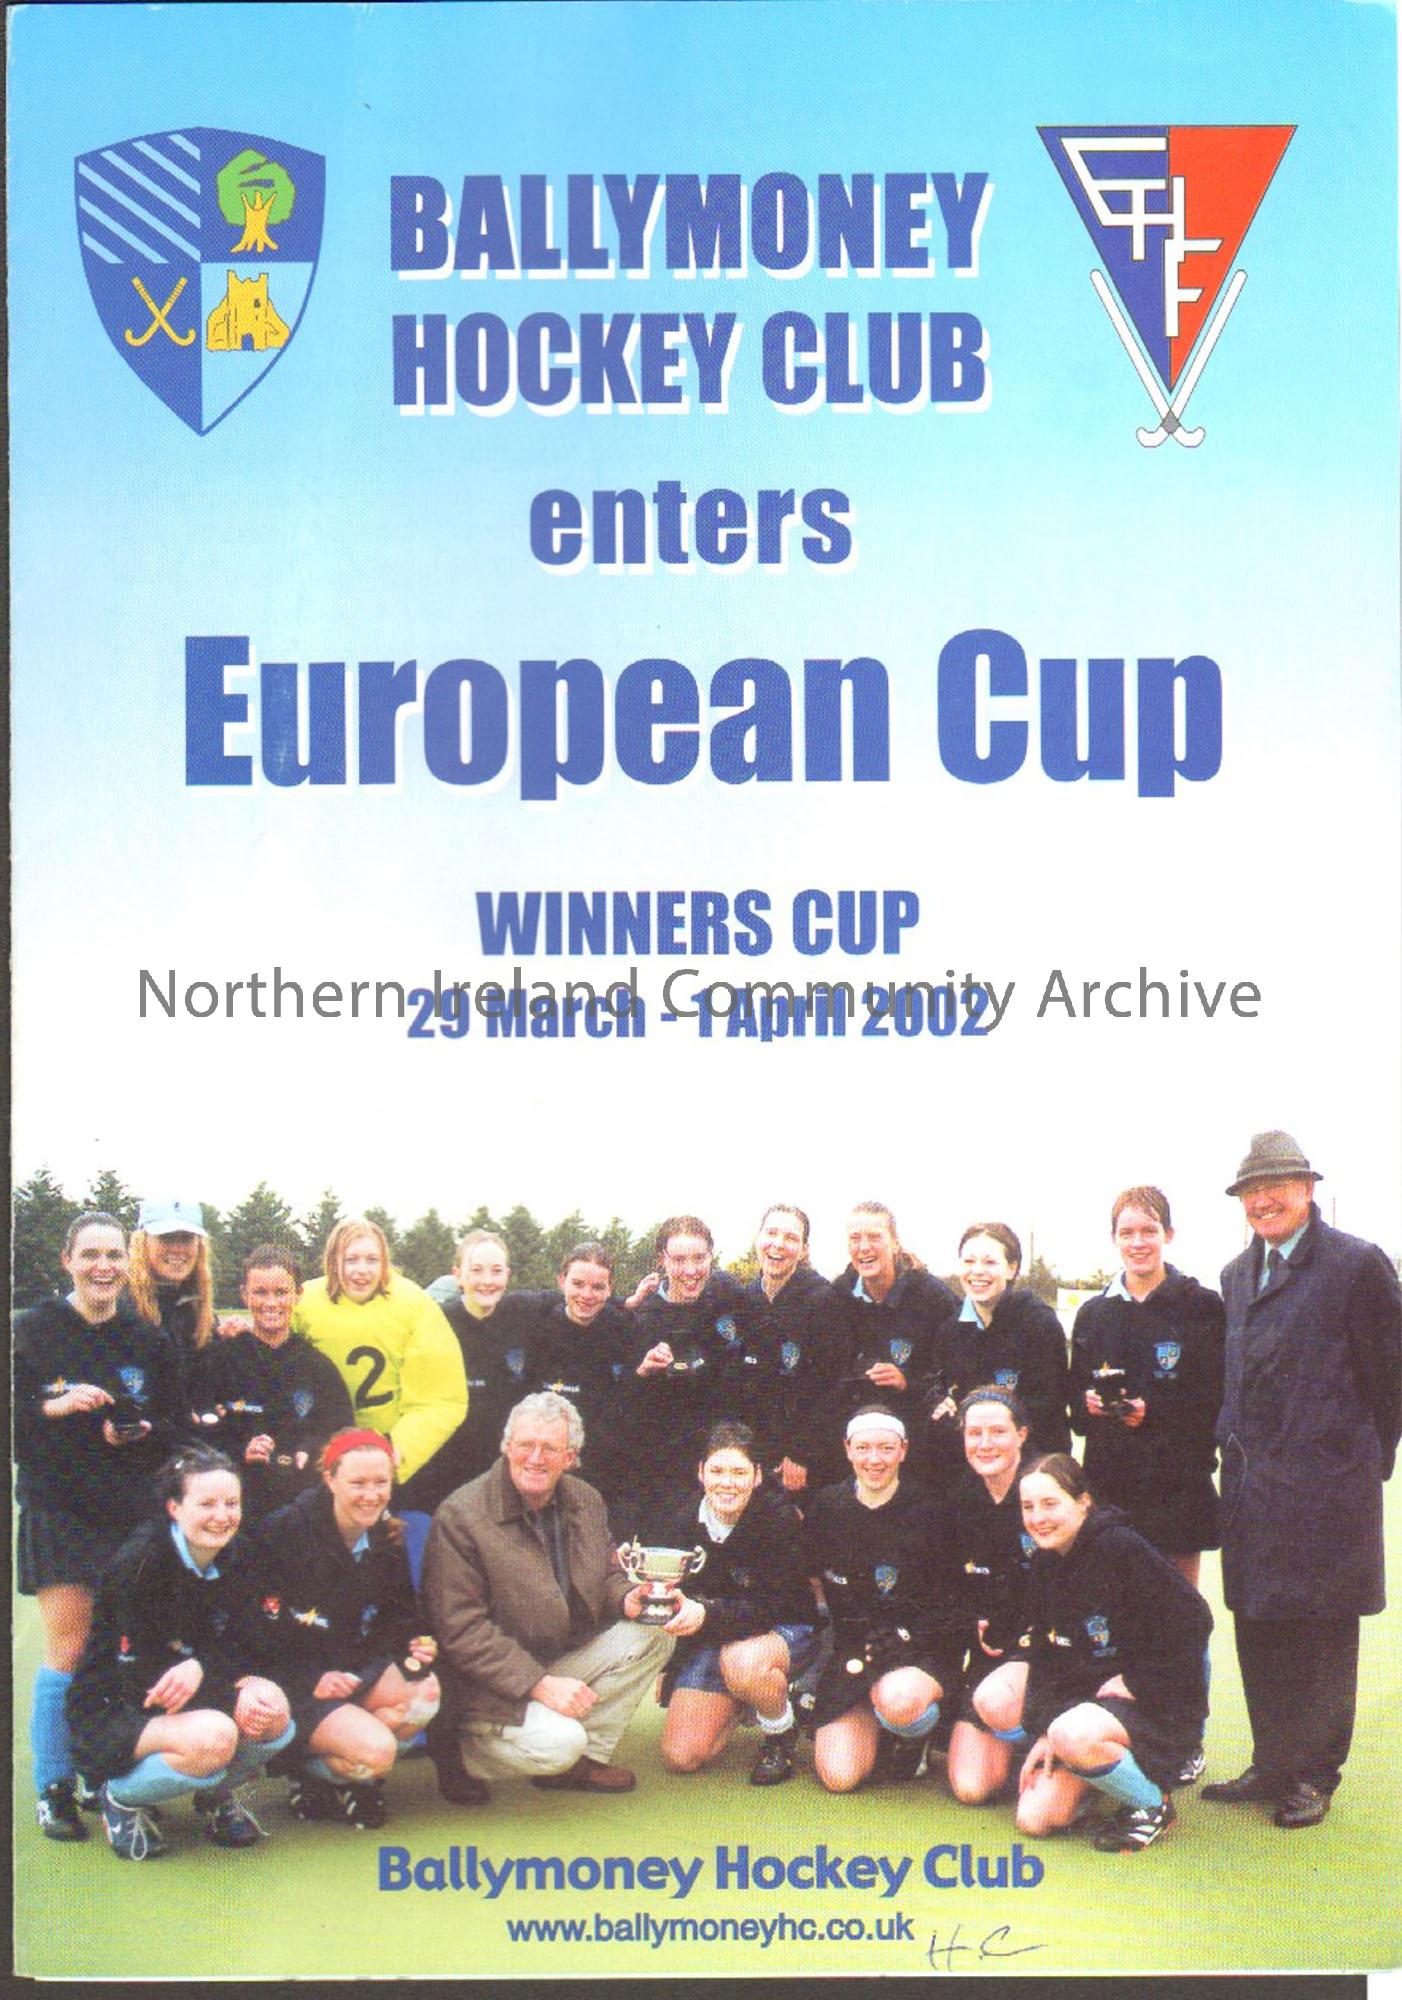 Ballymoney Hockey Club enters European Cup Winners Cup 29 March – 1 April 2002. Picture of ladies hockey players with a cup on the cover.